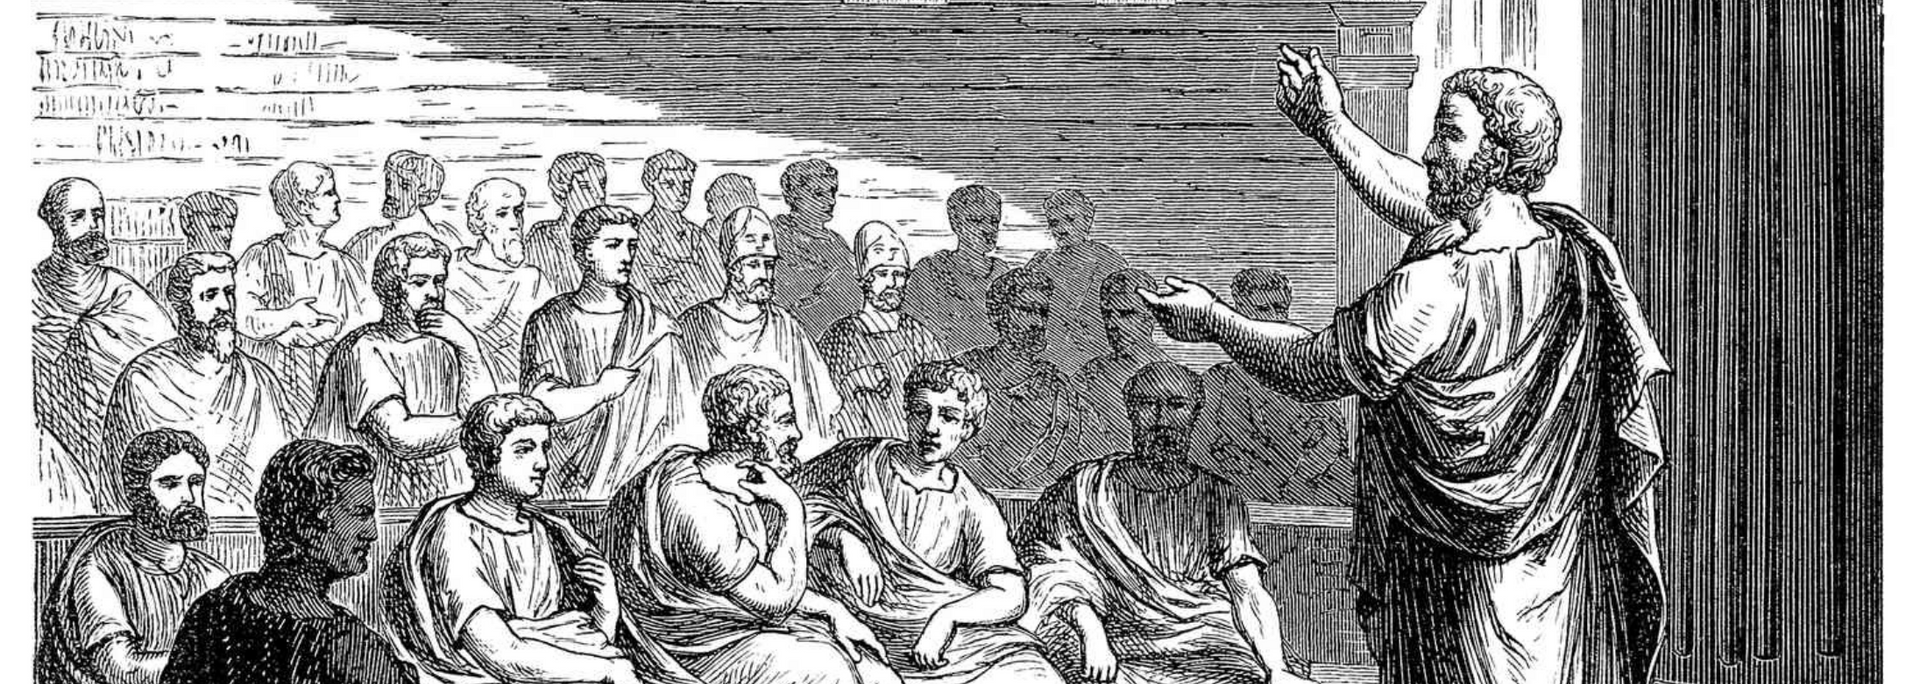 Image of an Ancient Greek assembly